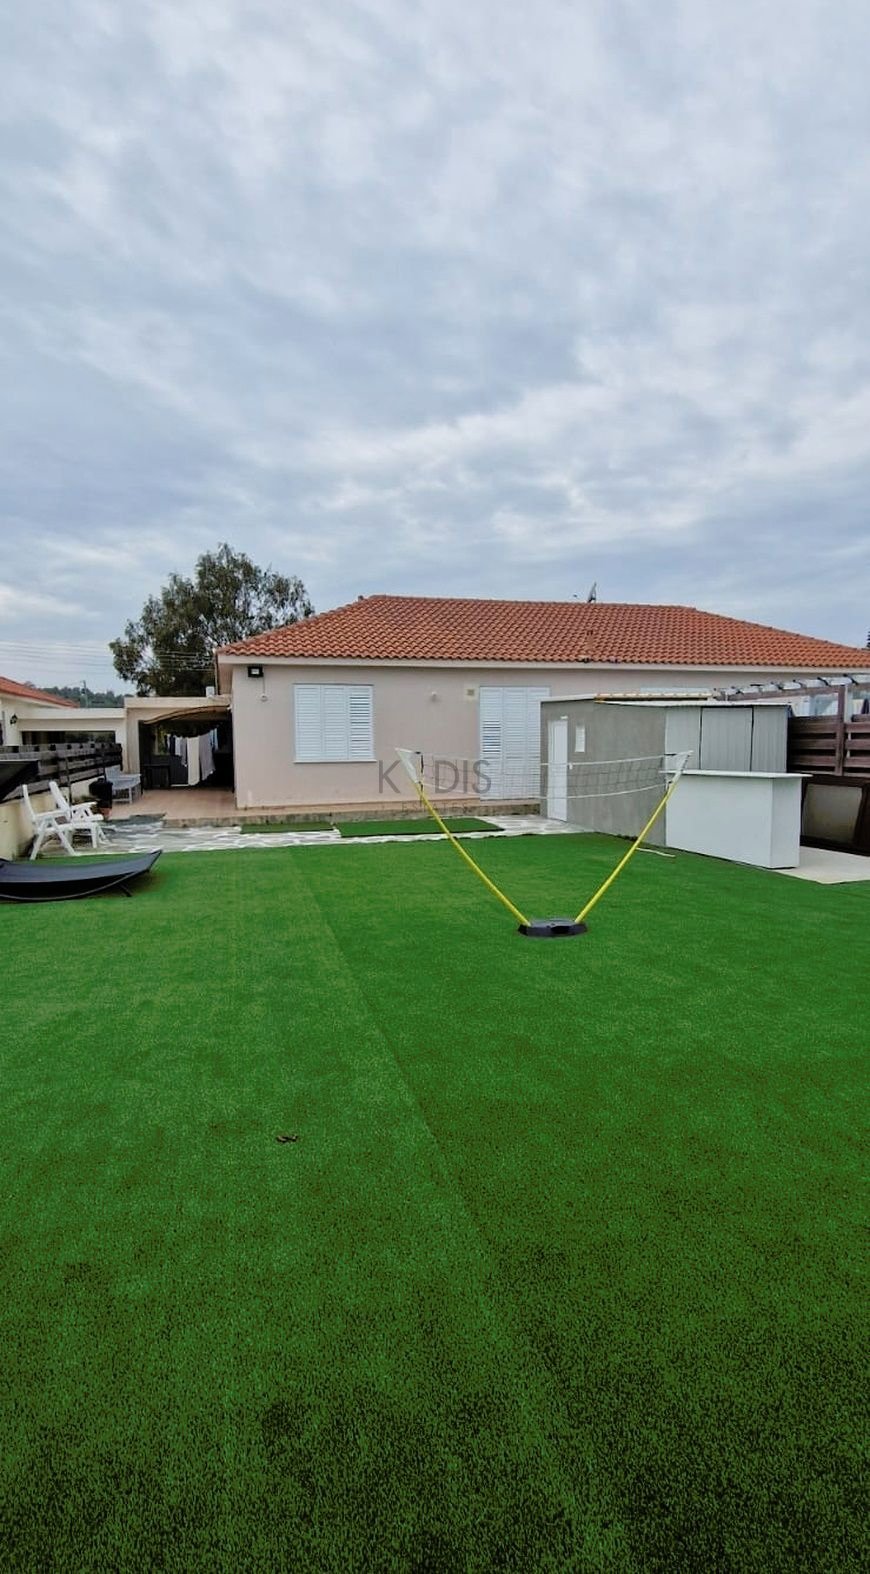 3 Bedroom House for Sale in Mazotos, Larnaca District